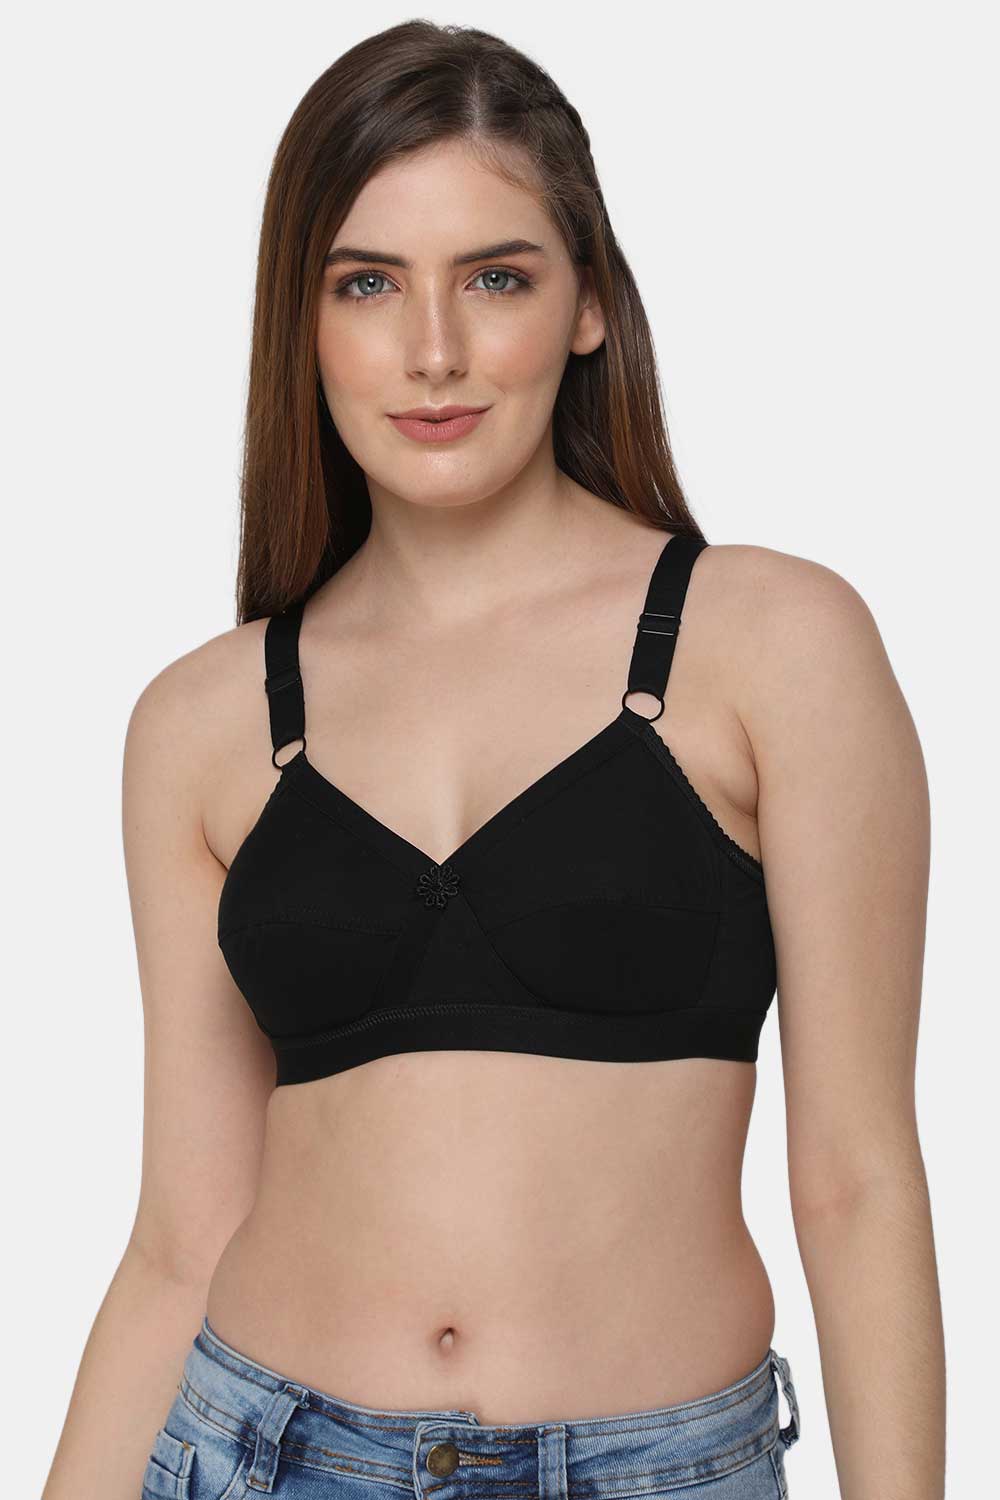 Plain T-Shirt Women Cotton Padded Bra Set at Rs 100/set in Greater